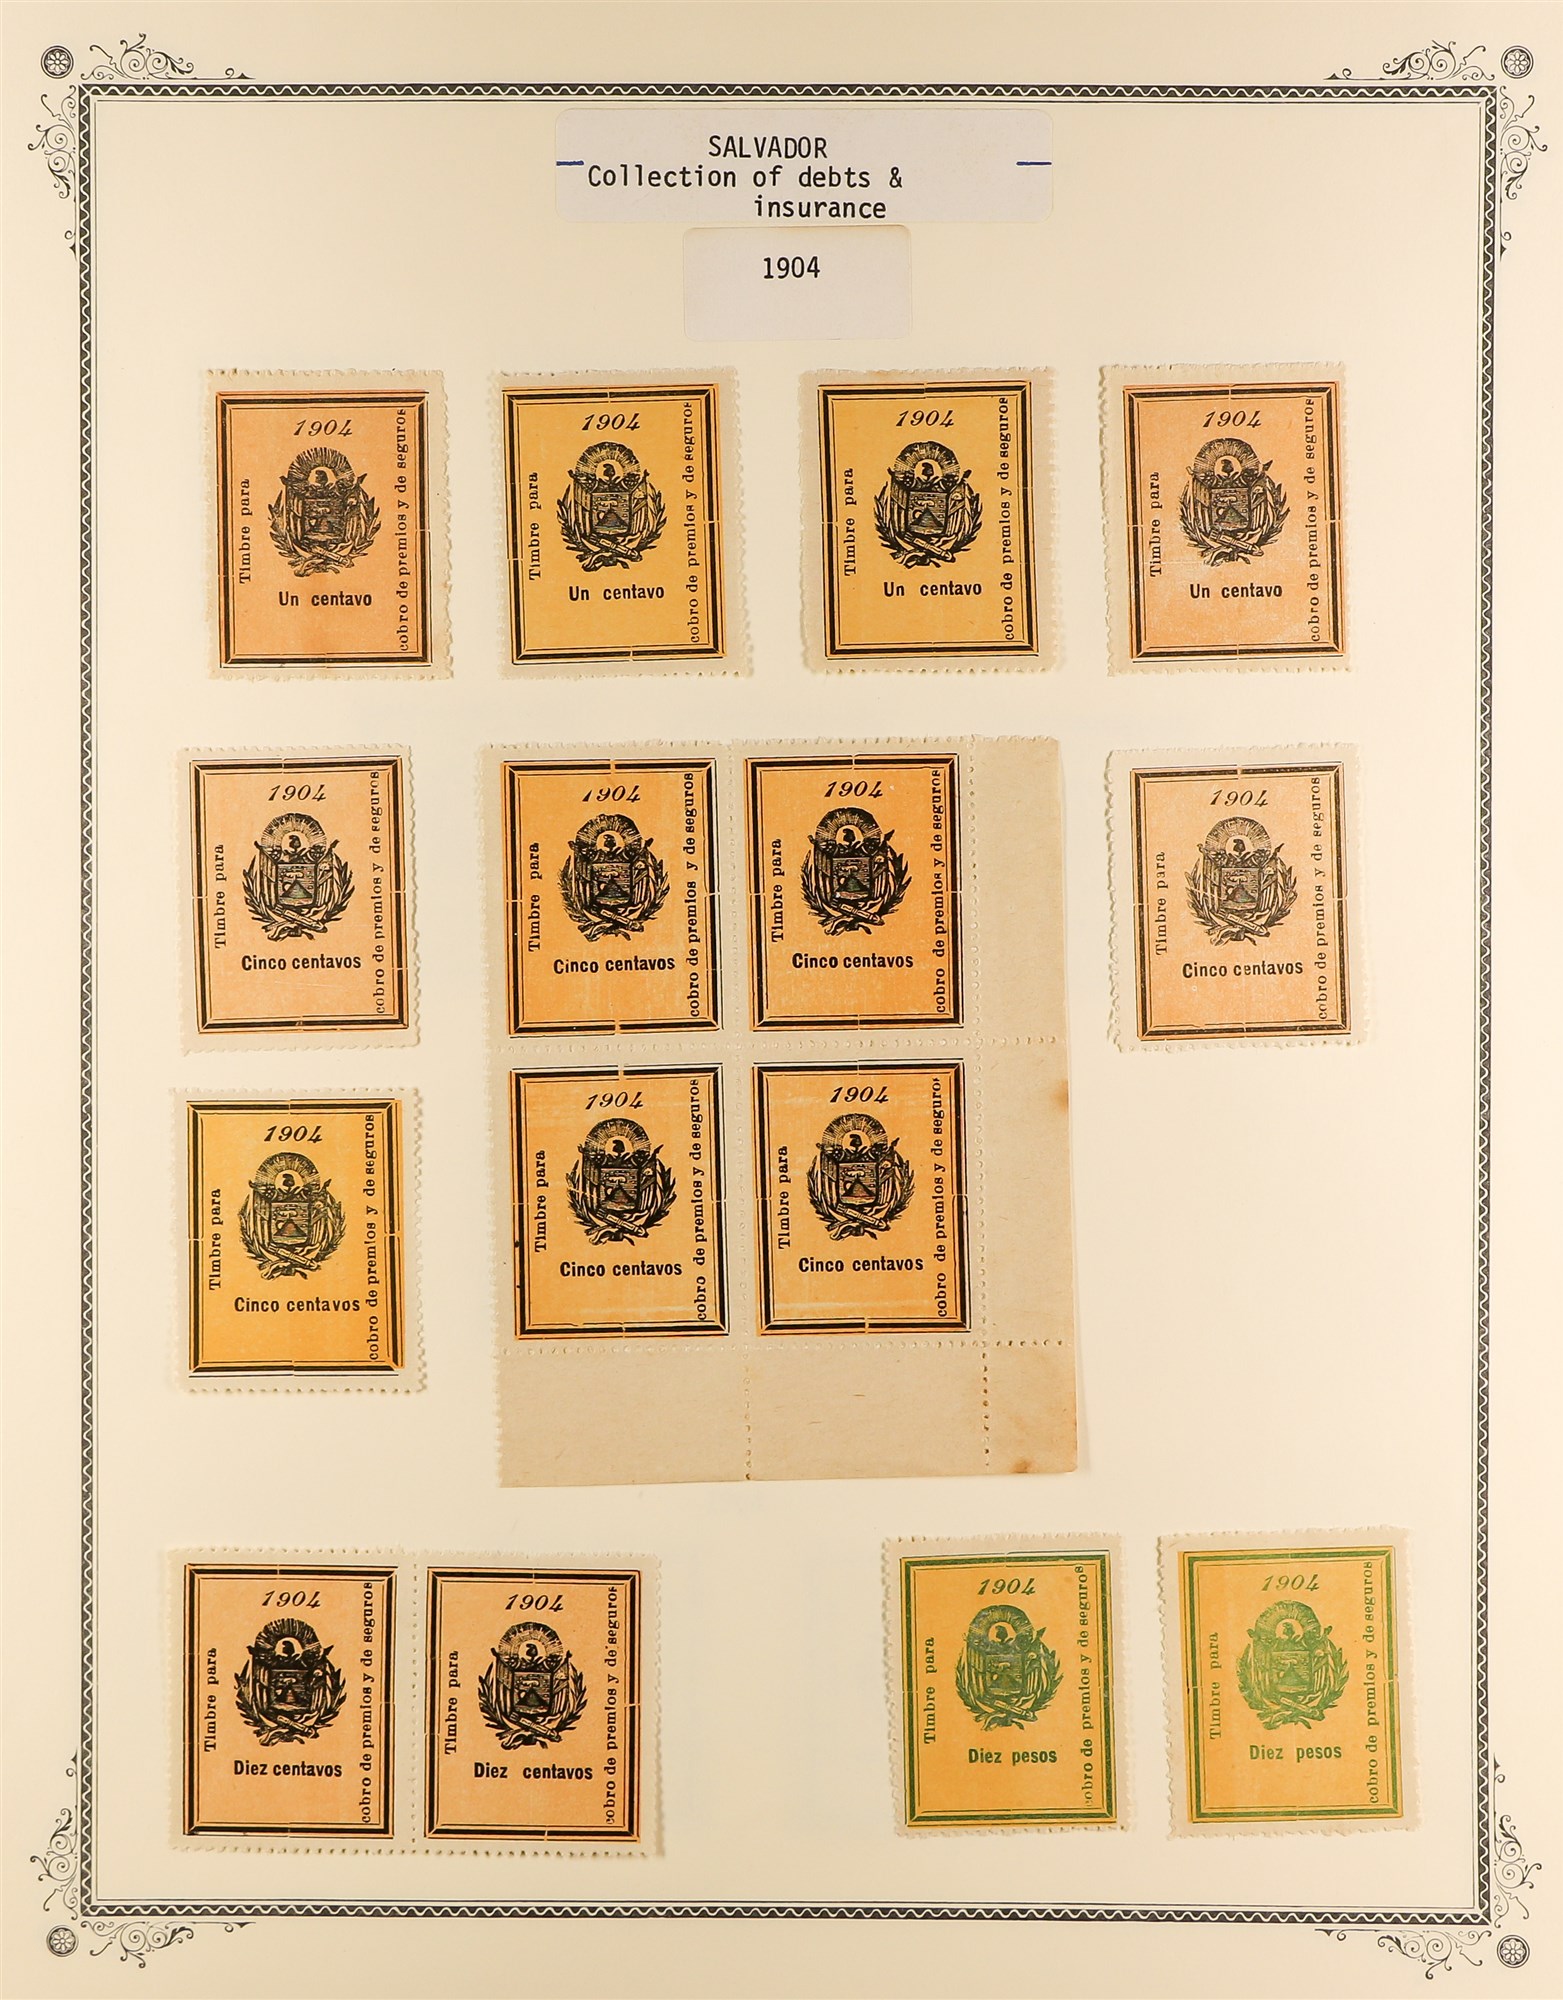 EL SALVADOR REVENUE STAMPS 1883 - 1925 mint & used collection of over 400 revenue stamps, on album - Image 3 of 27